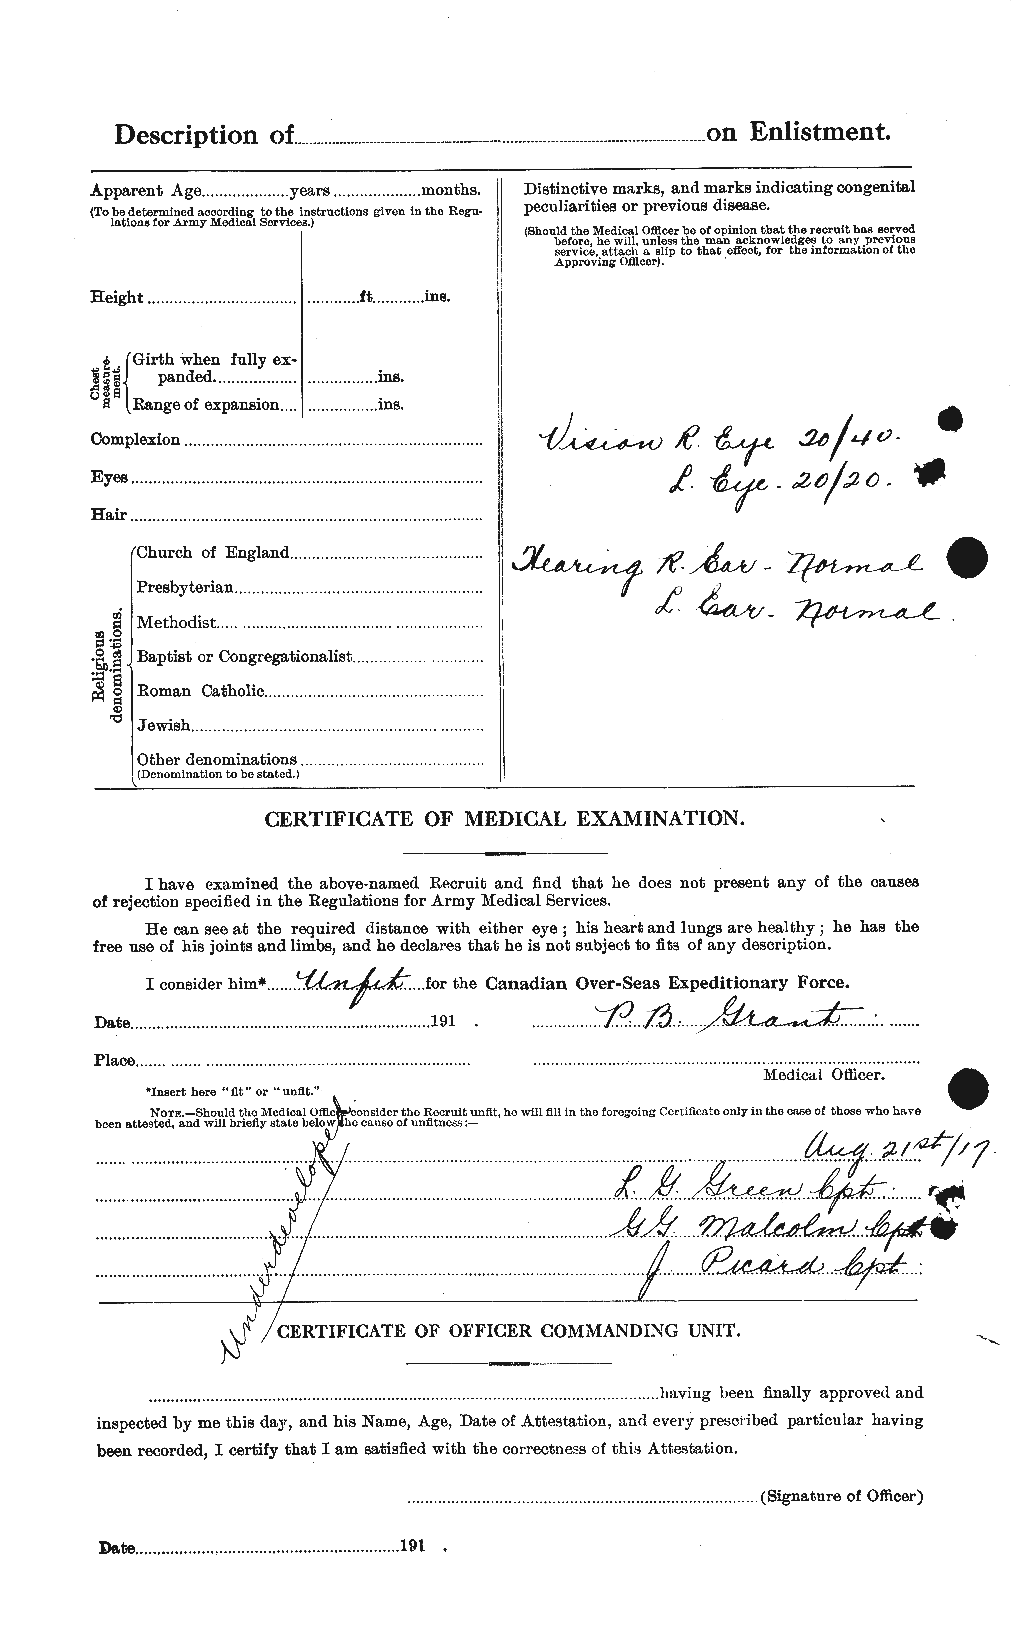 Personnel Records of the First World War - CEF 069285b